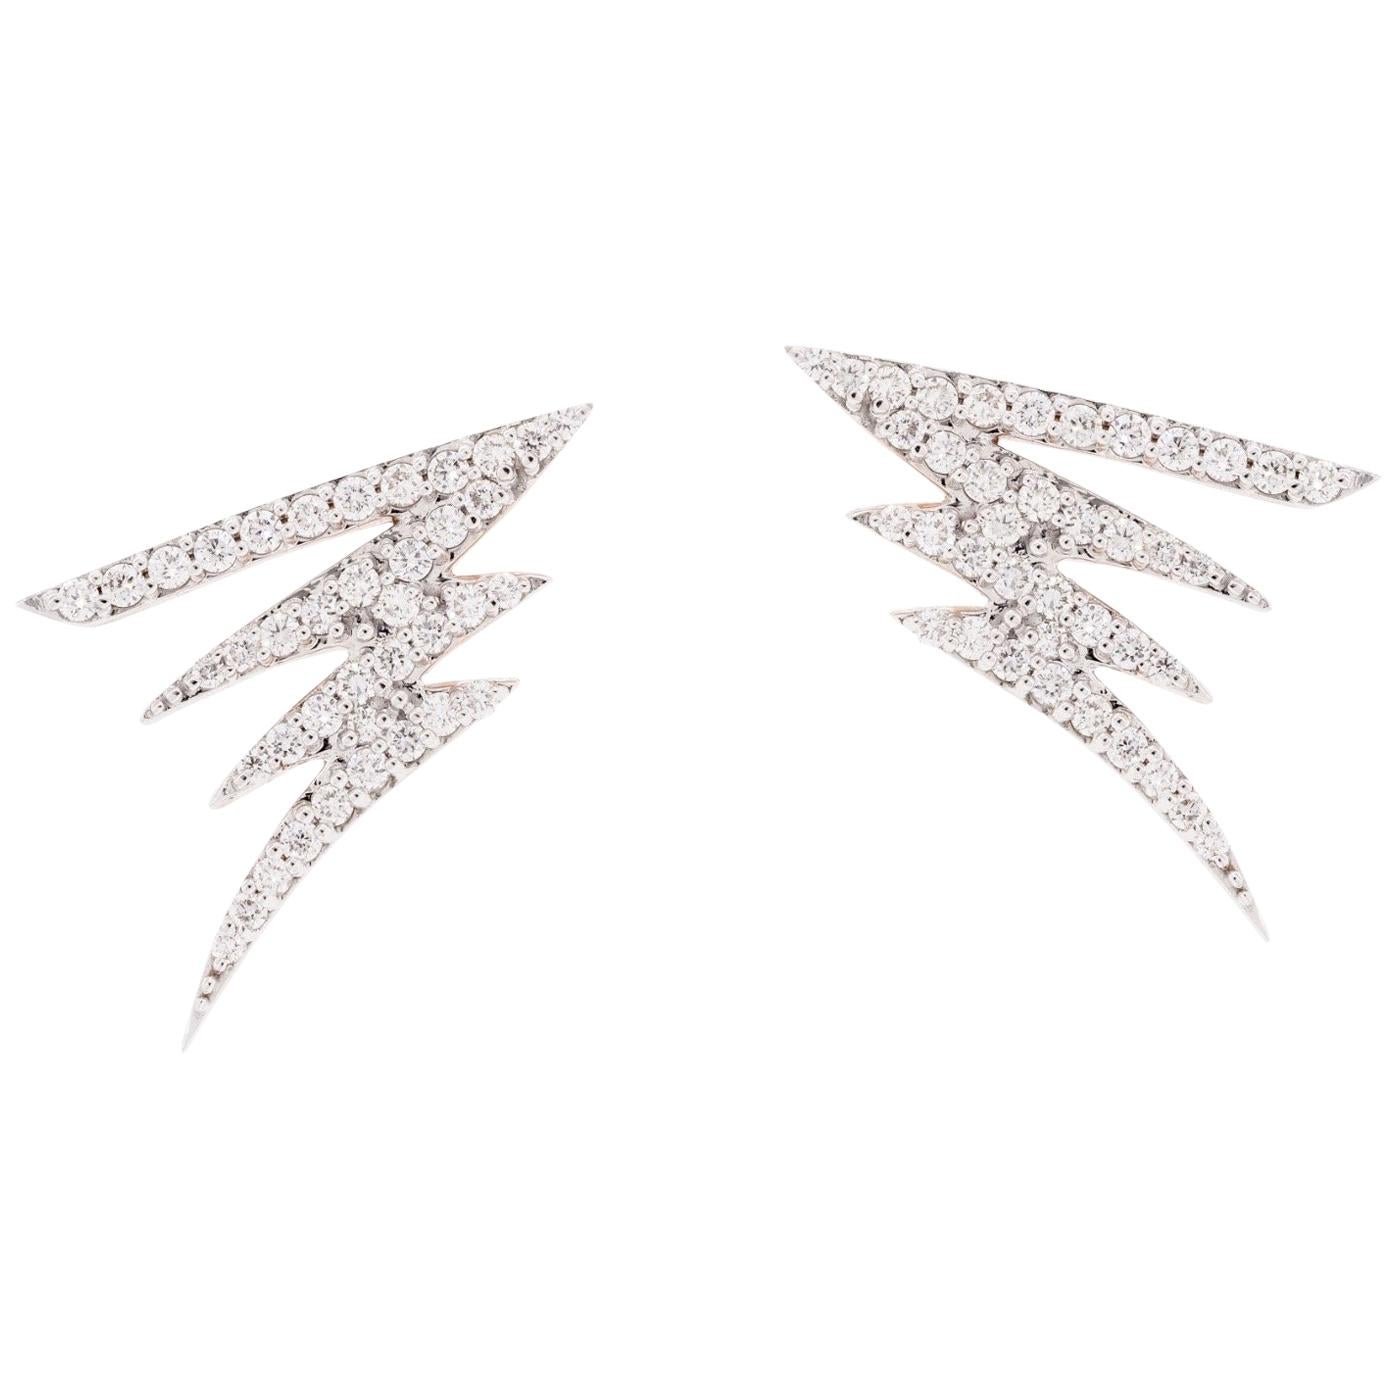 Alessa Signature Pave Earrings 18 Karat White Gold Signature Collection im Angebot